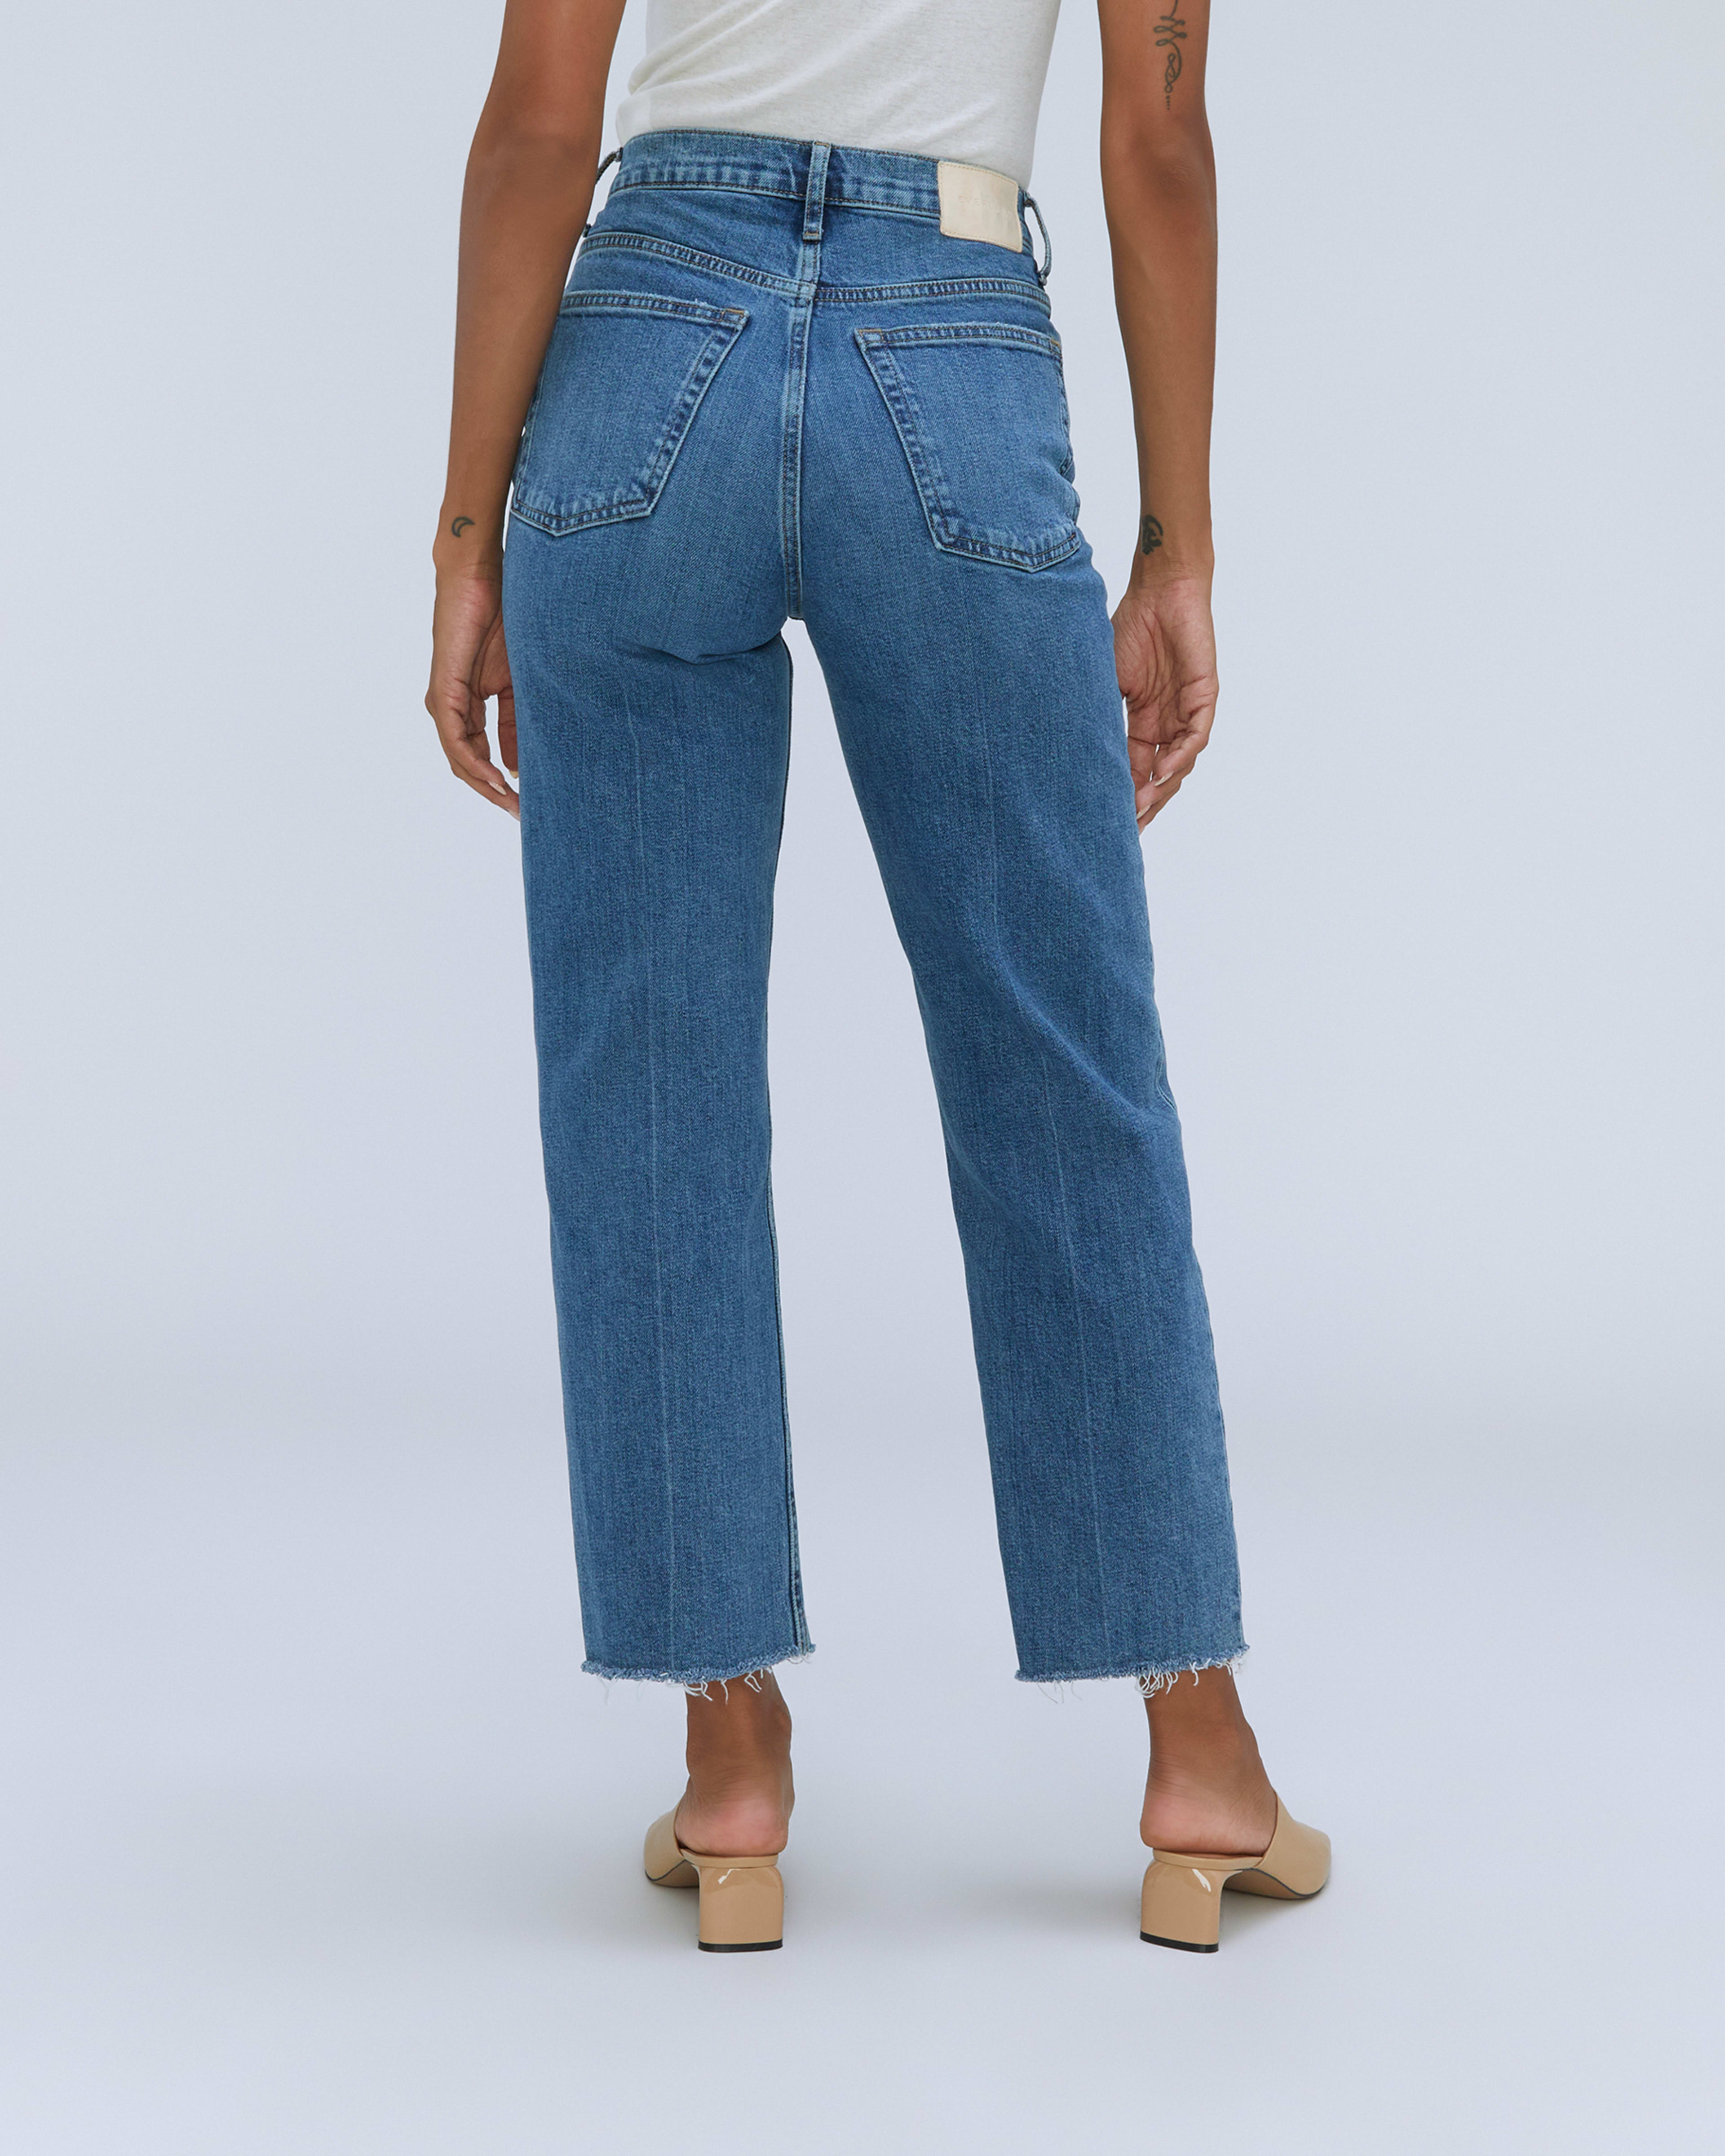 The Way-High® Jean Distressed – Everlane